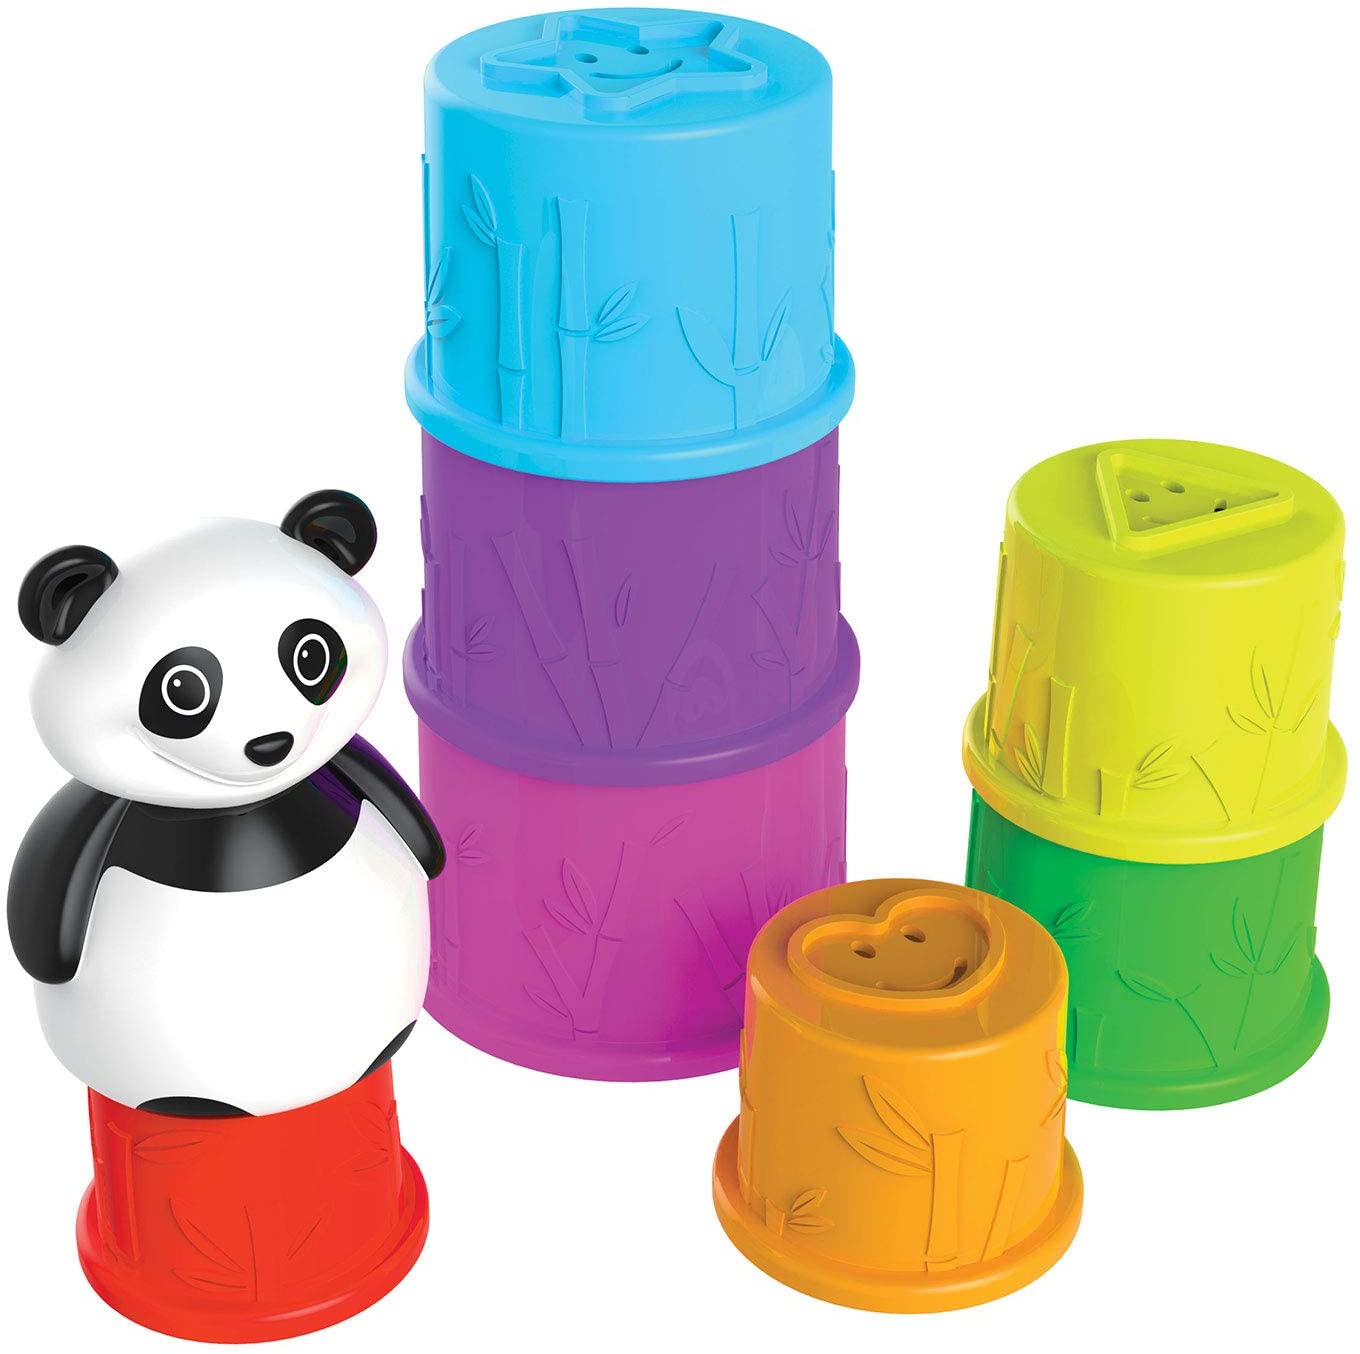 Play & Learn Stacking Cups